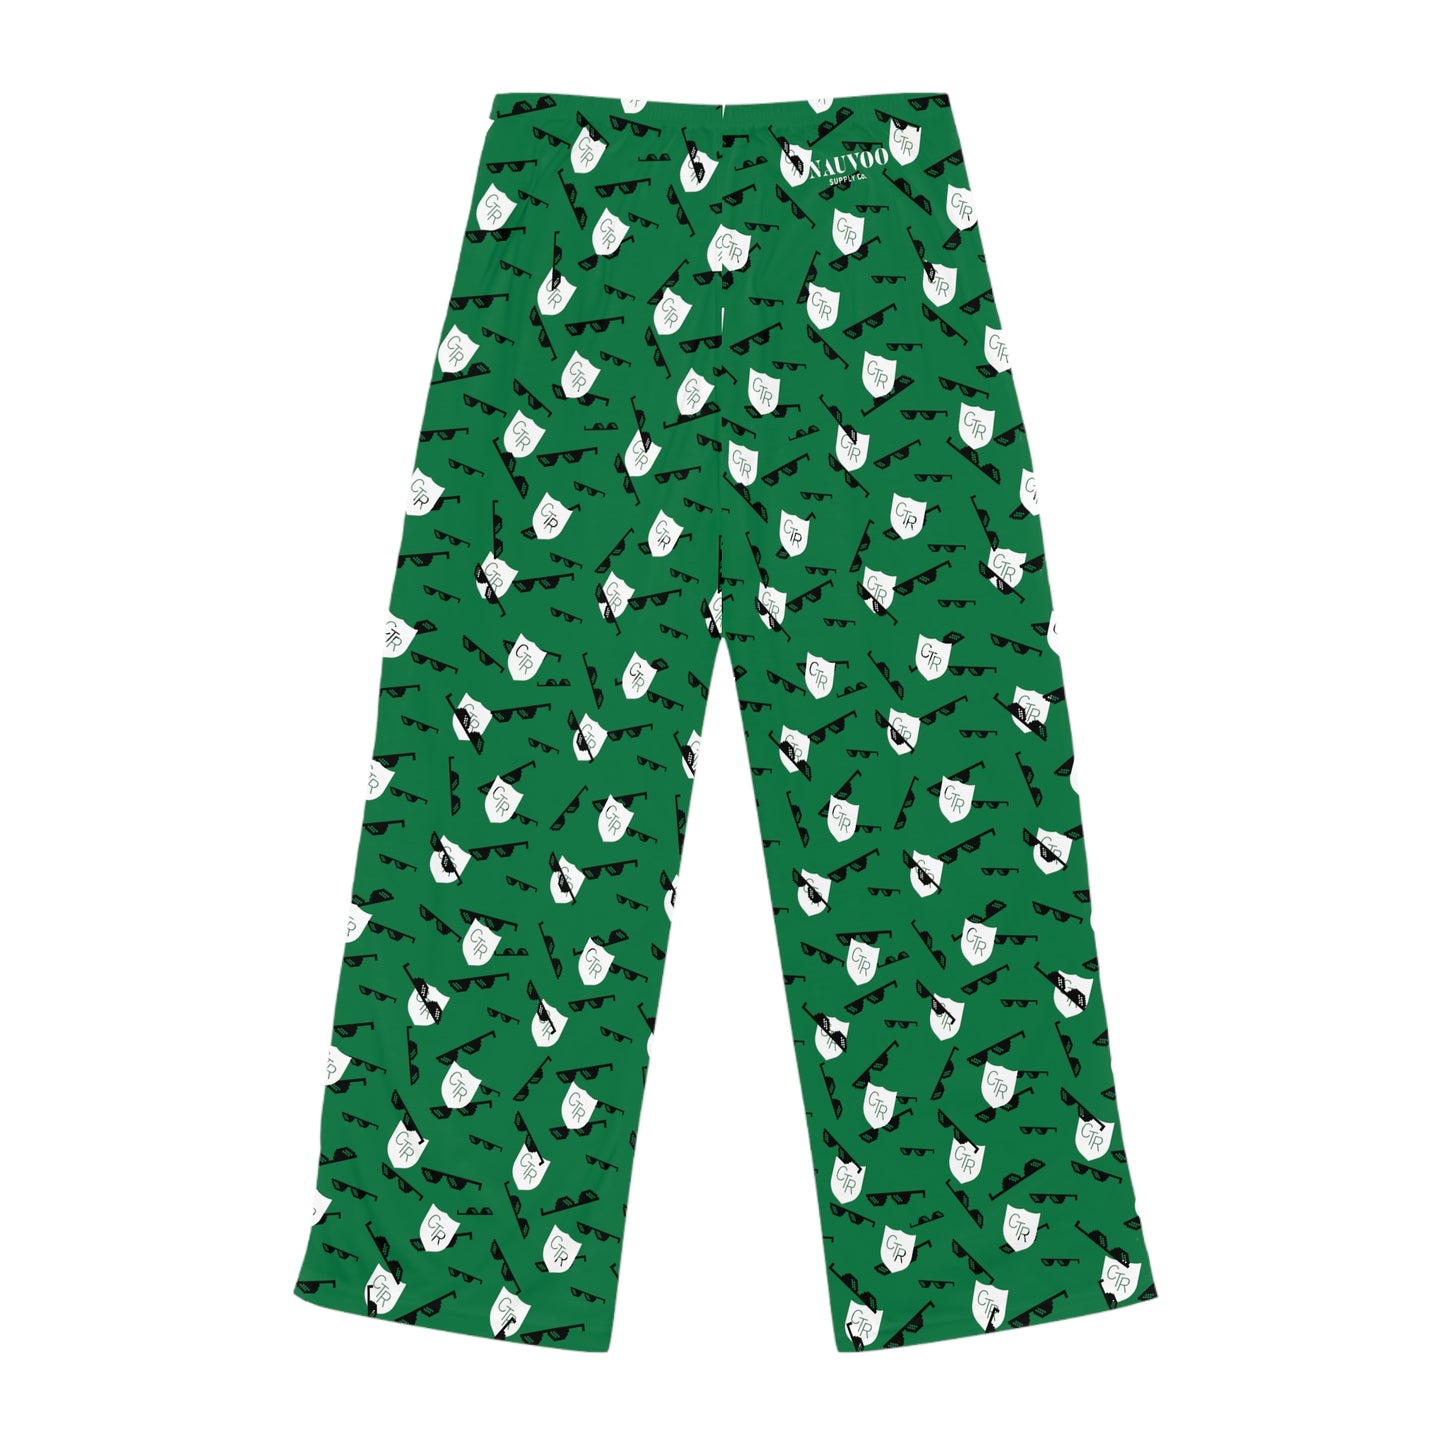 Women's Choose the Right (and Deal With It) Pajama Pants